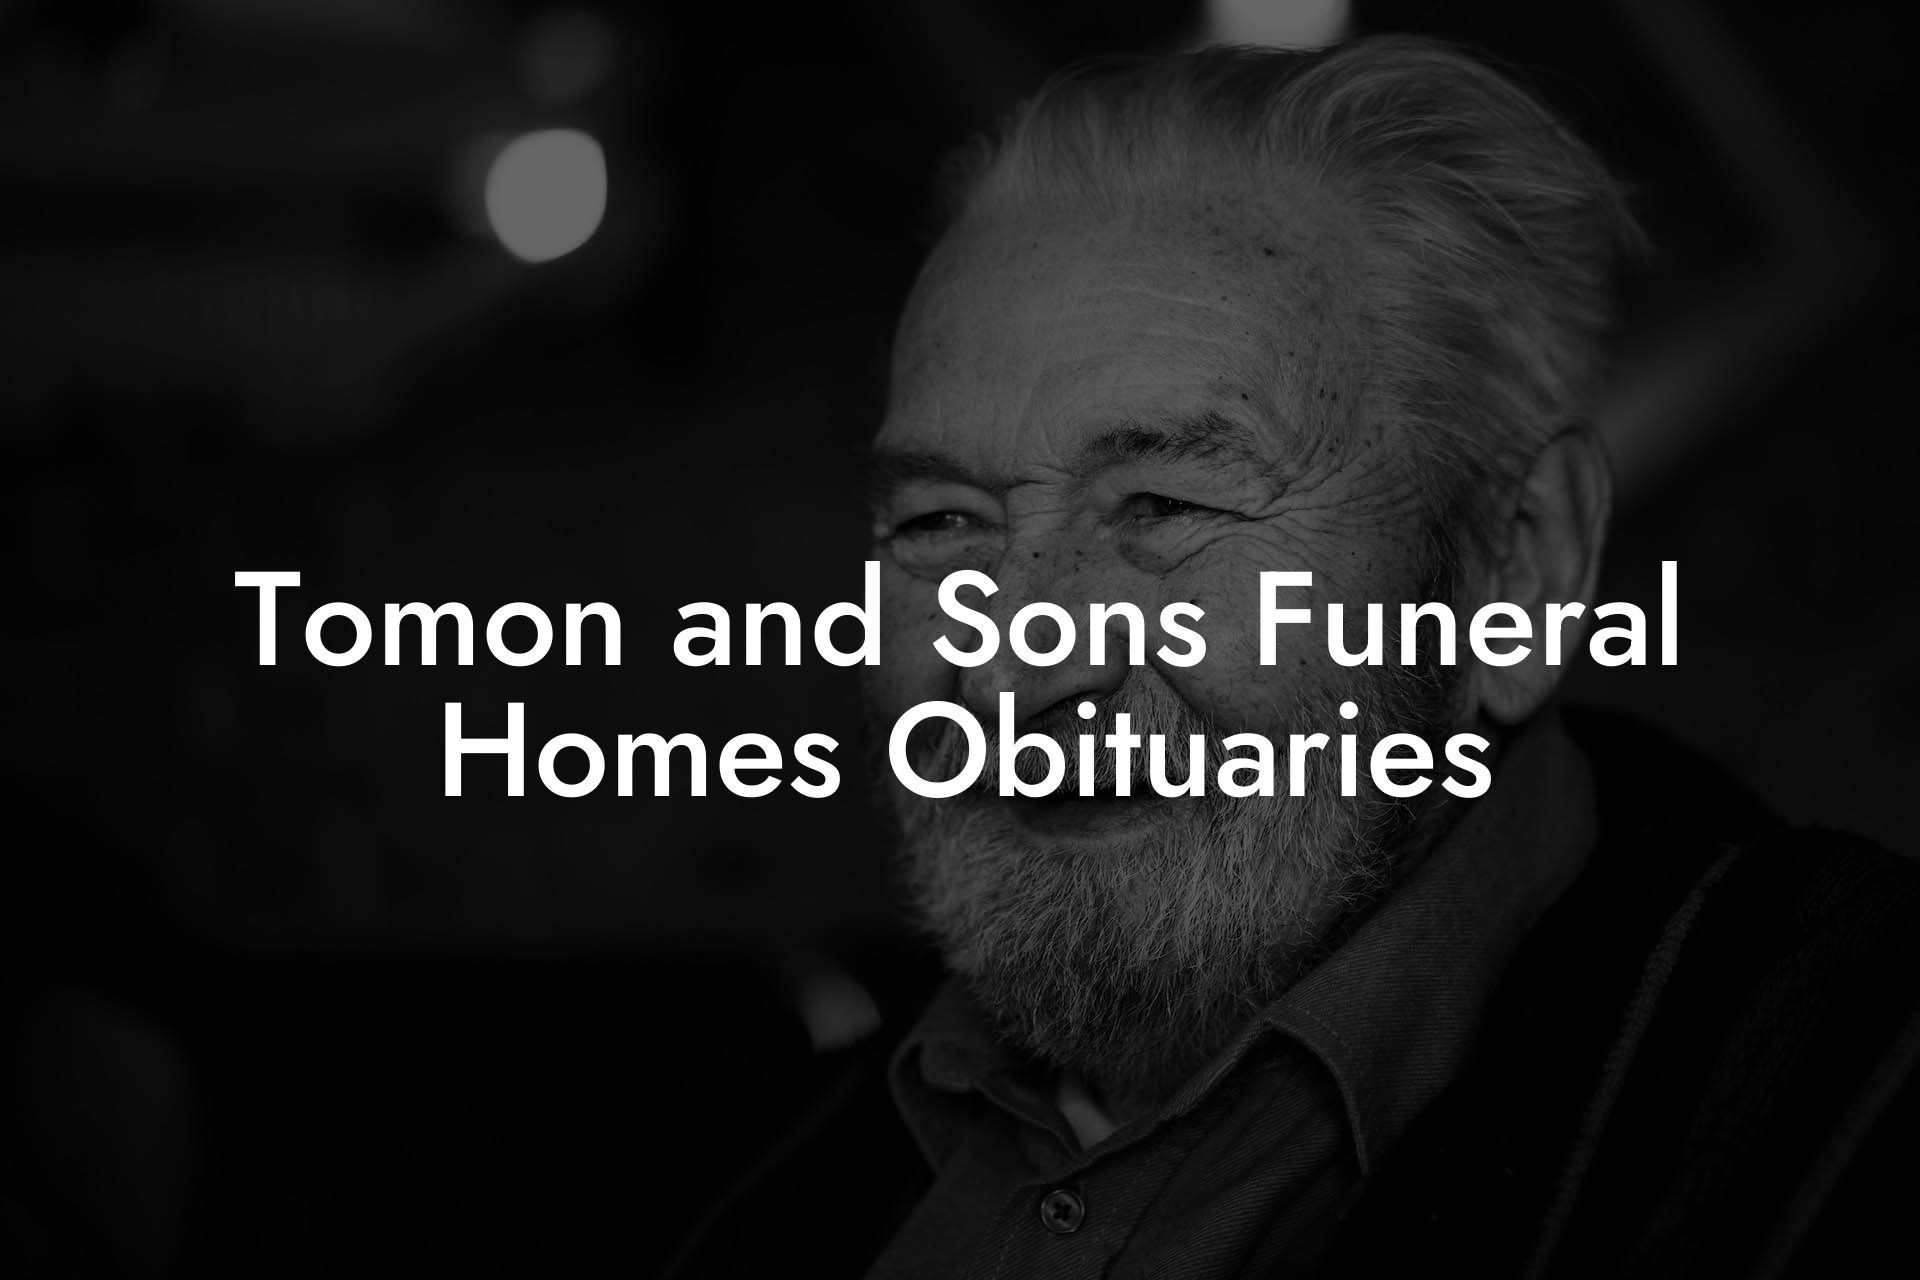 Tomon and Sons Funeral Homes Obituaries